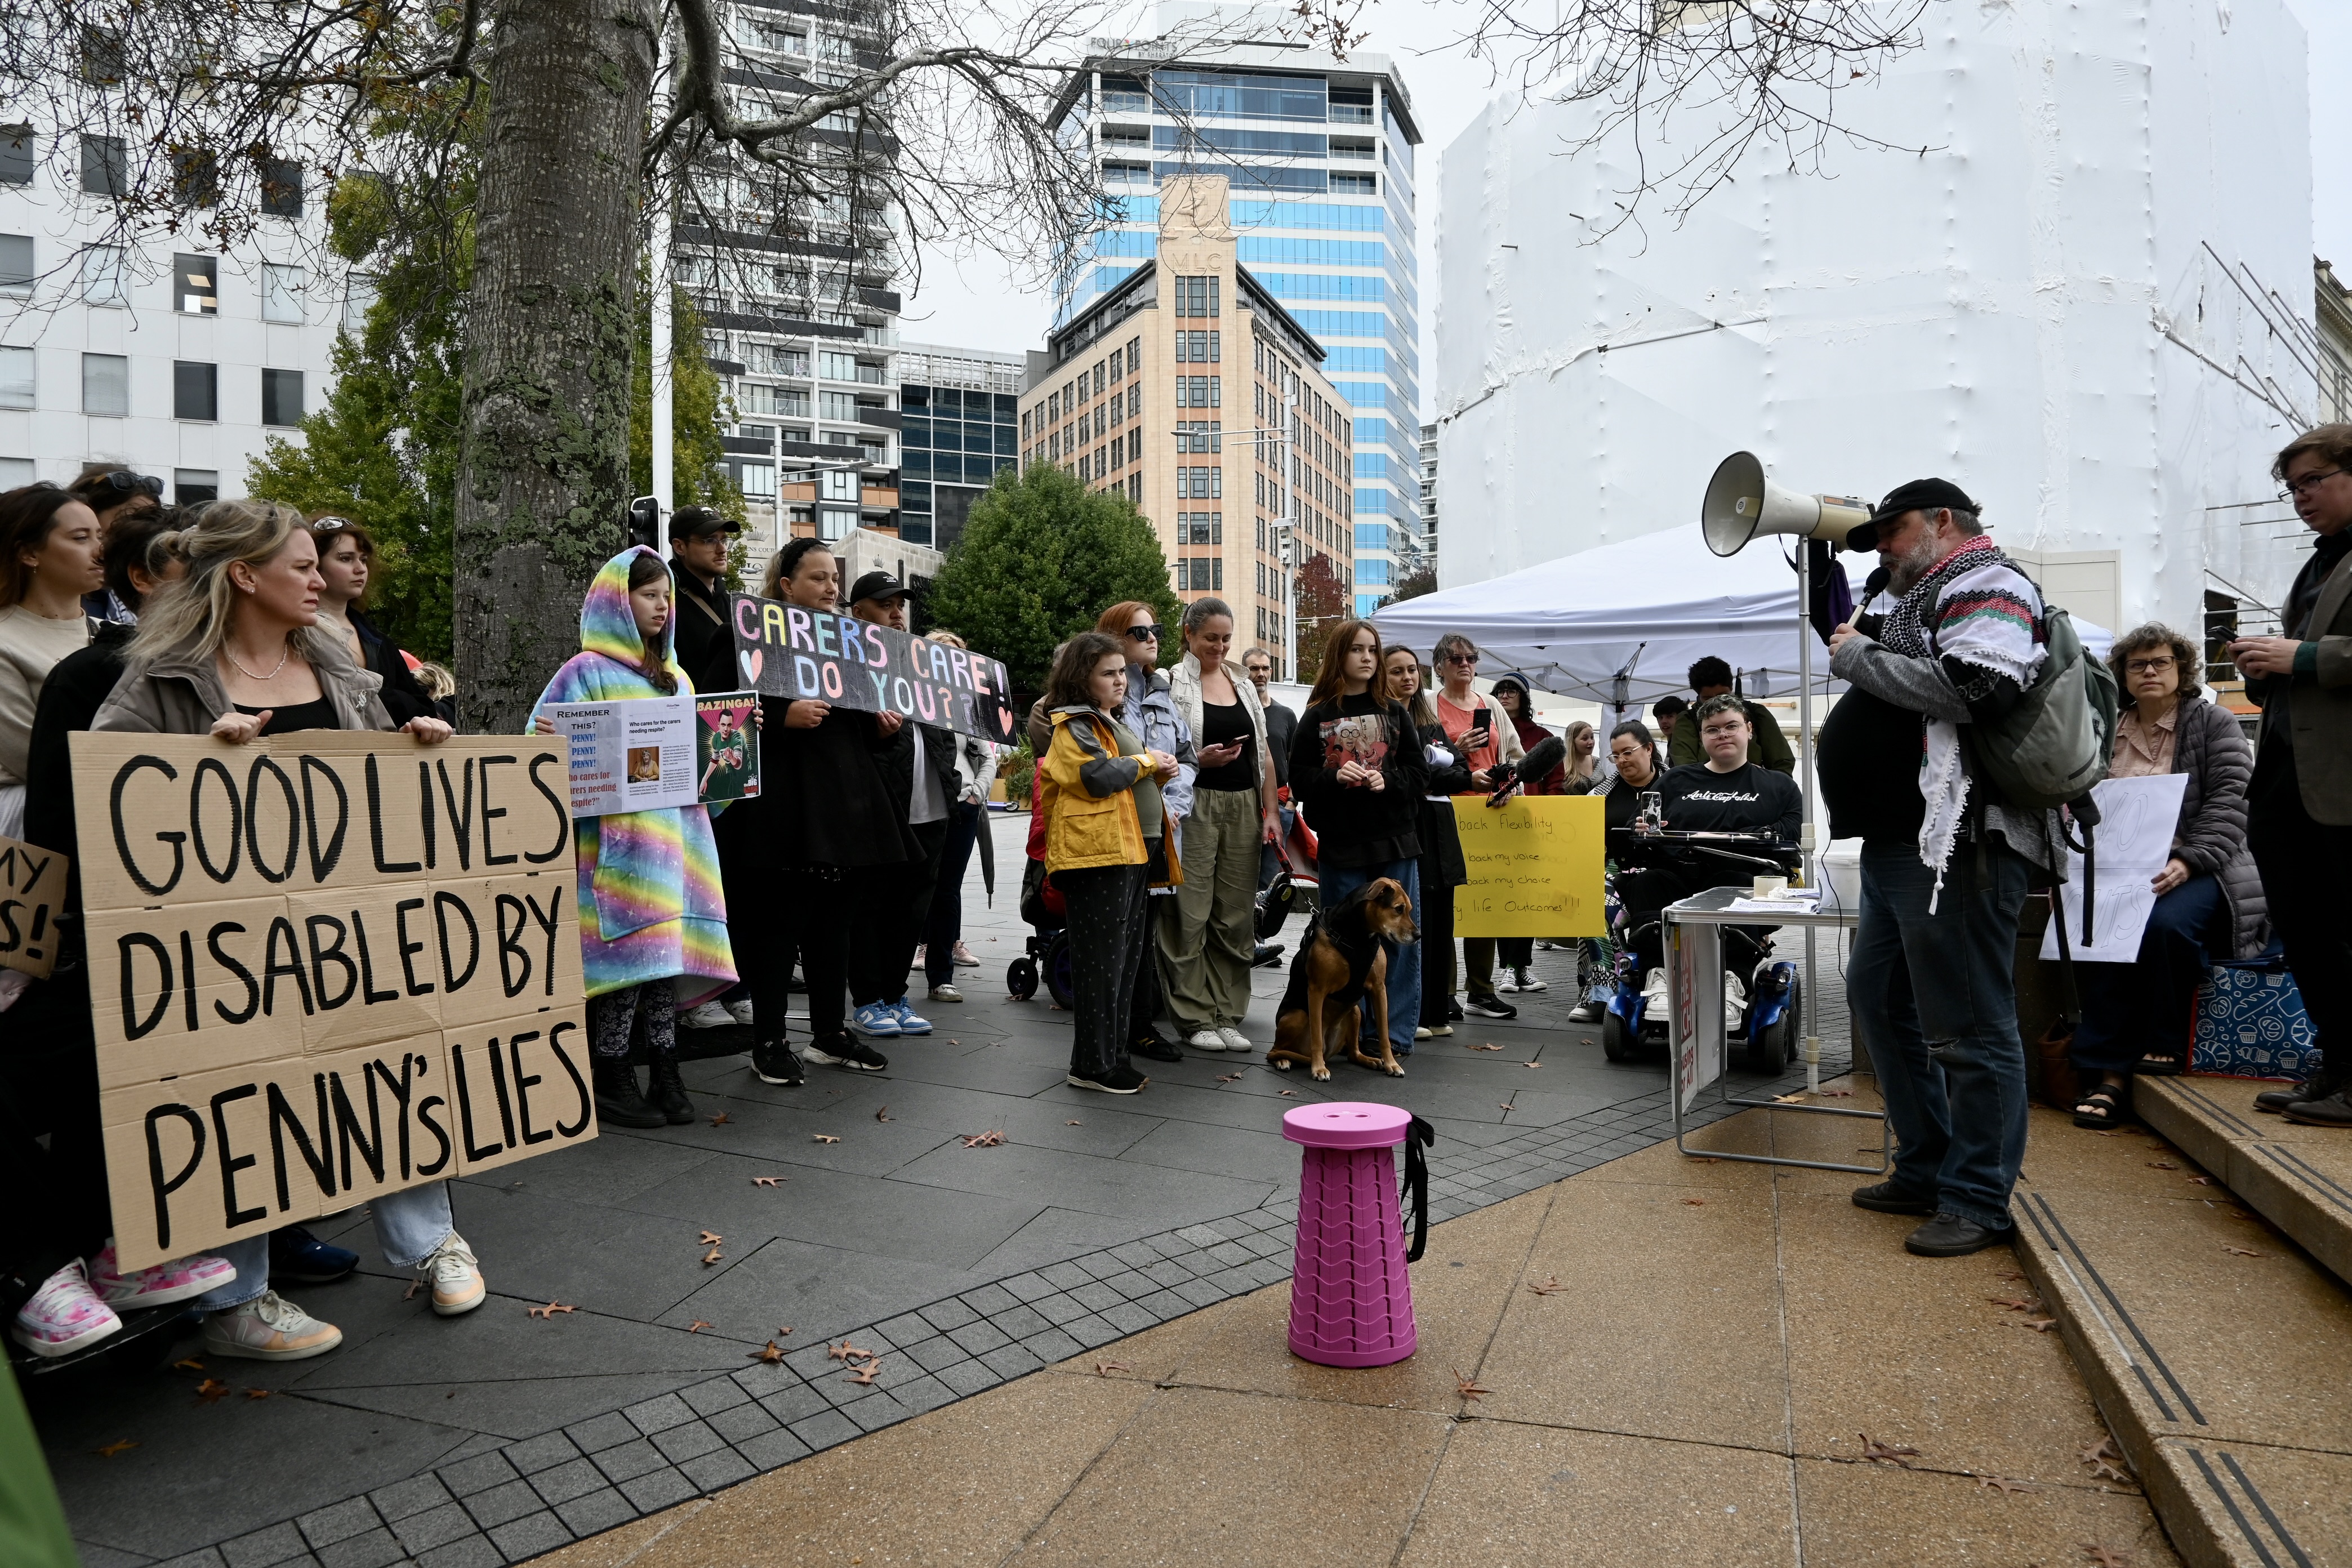 A group of disabled and nondisabled people protest, with a man speaking into a megaphone in front of the crowd. A cardboard sign reads: Good lives disabled by Penny's lies.  Another sign reads: Carers care, do you?